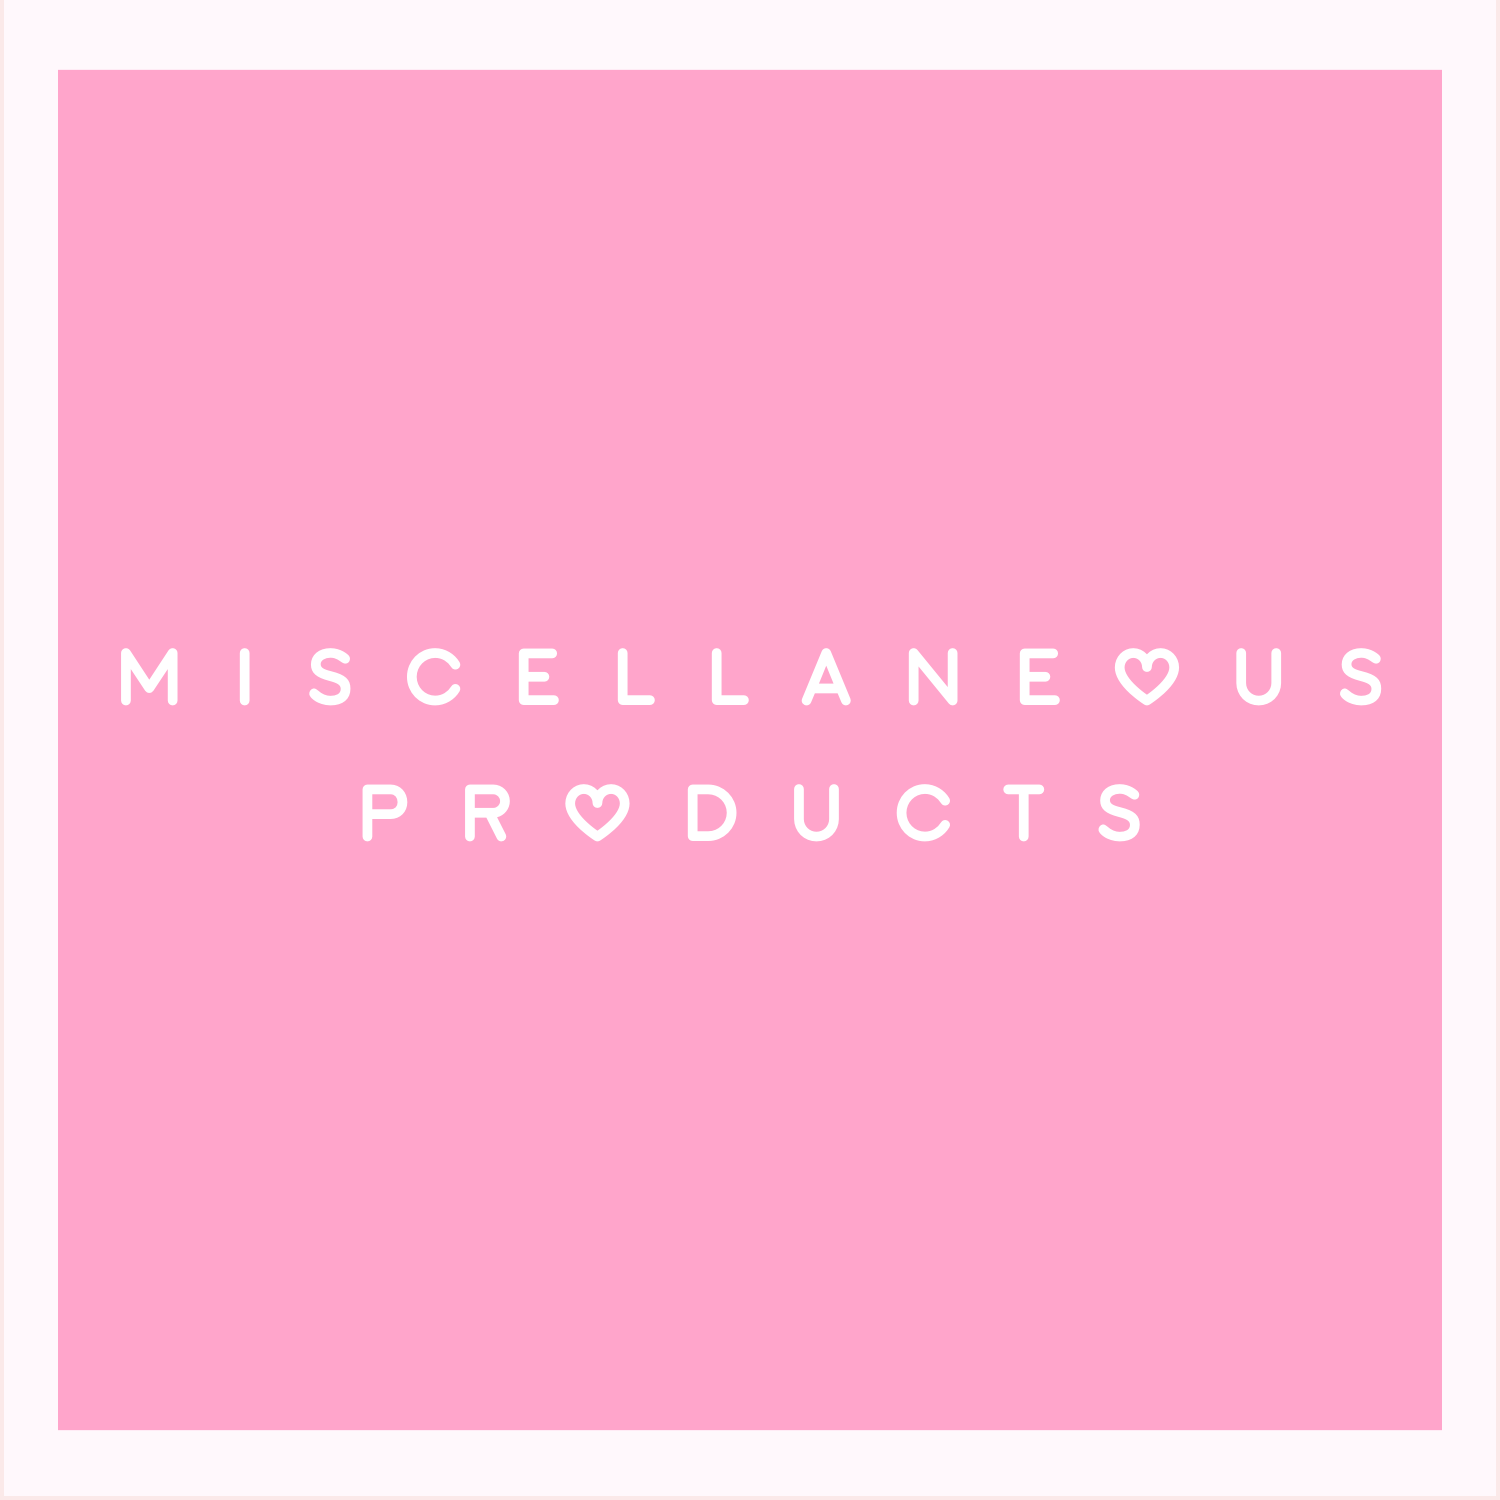 MISCELLANEOUS PRODUCTS